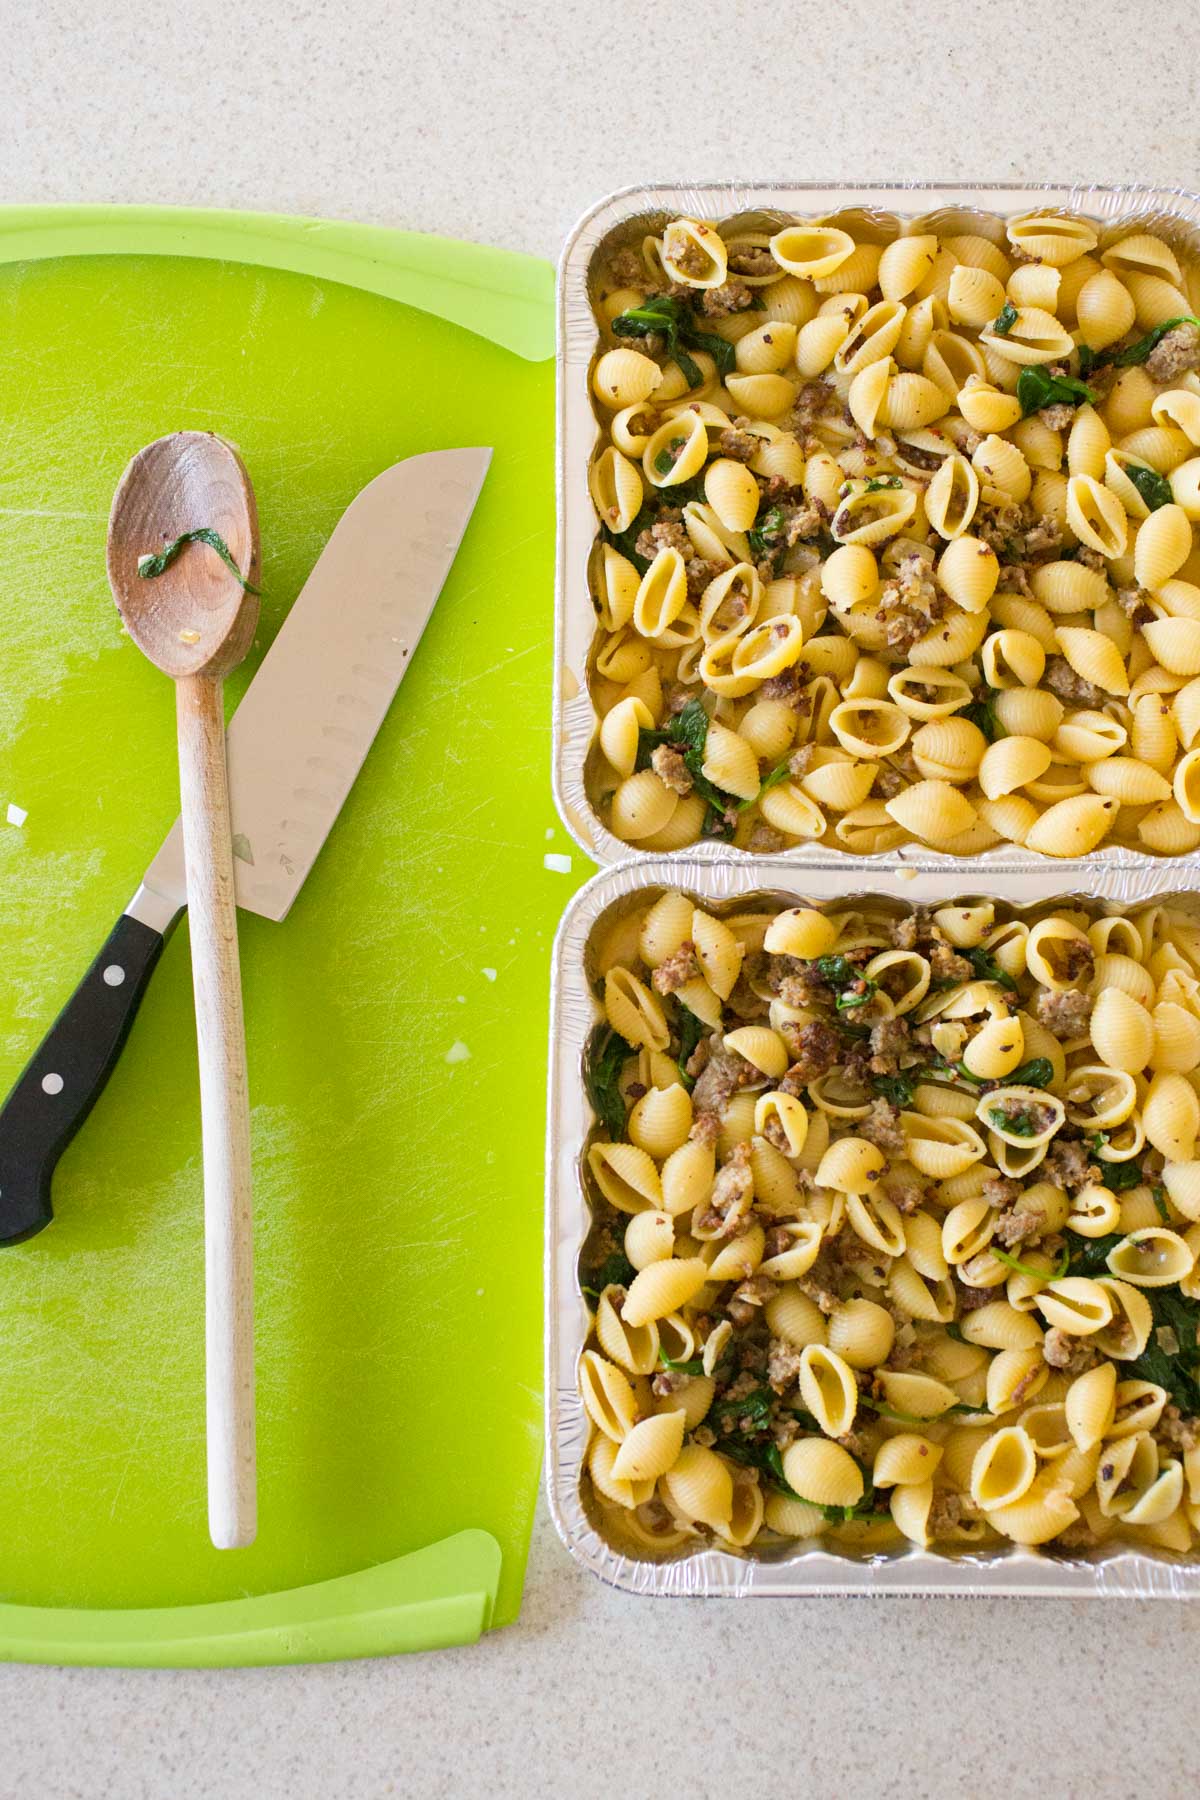 The pasta has been stirred into the mixture and placed in two 8x8-inch baking pans. A spoon and a knife rest on a cutting board next to them.